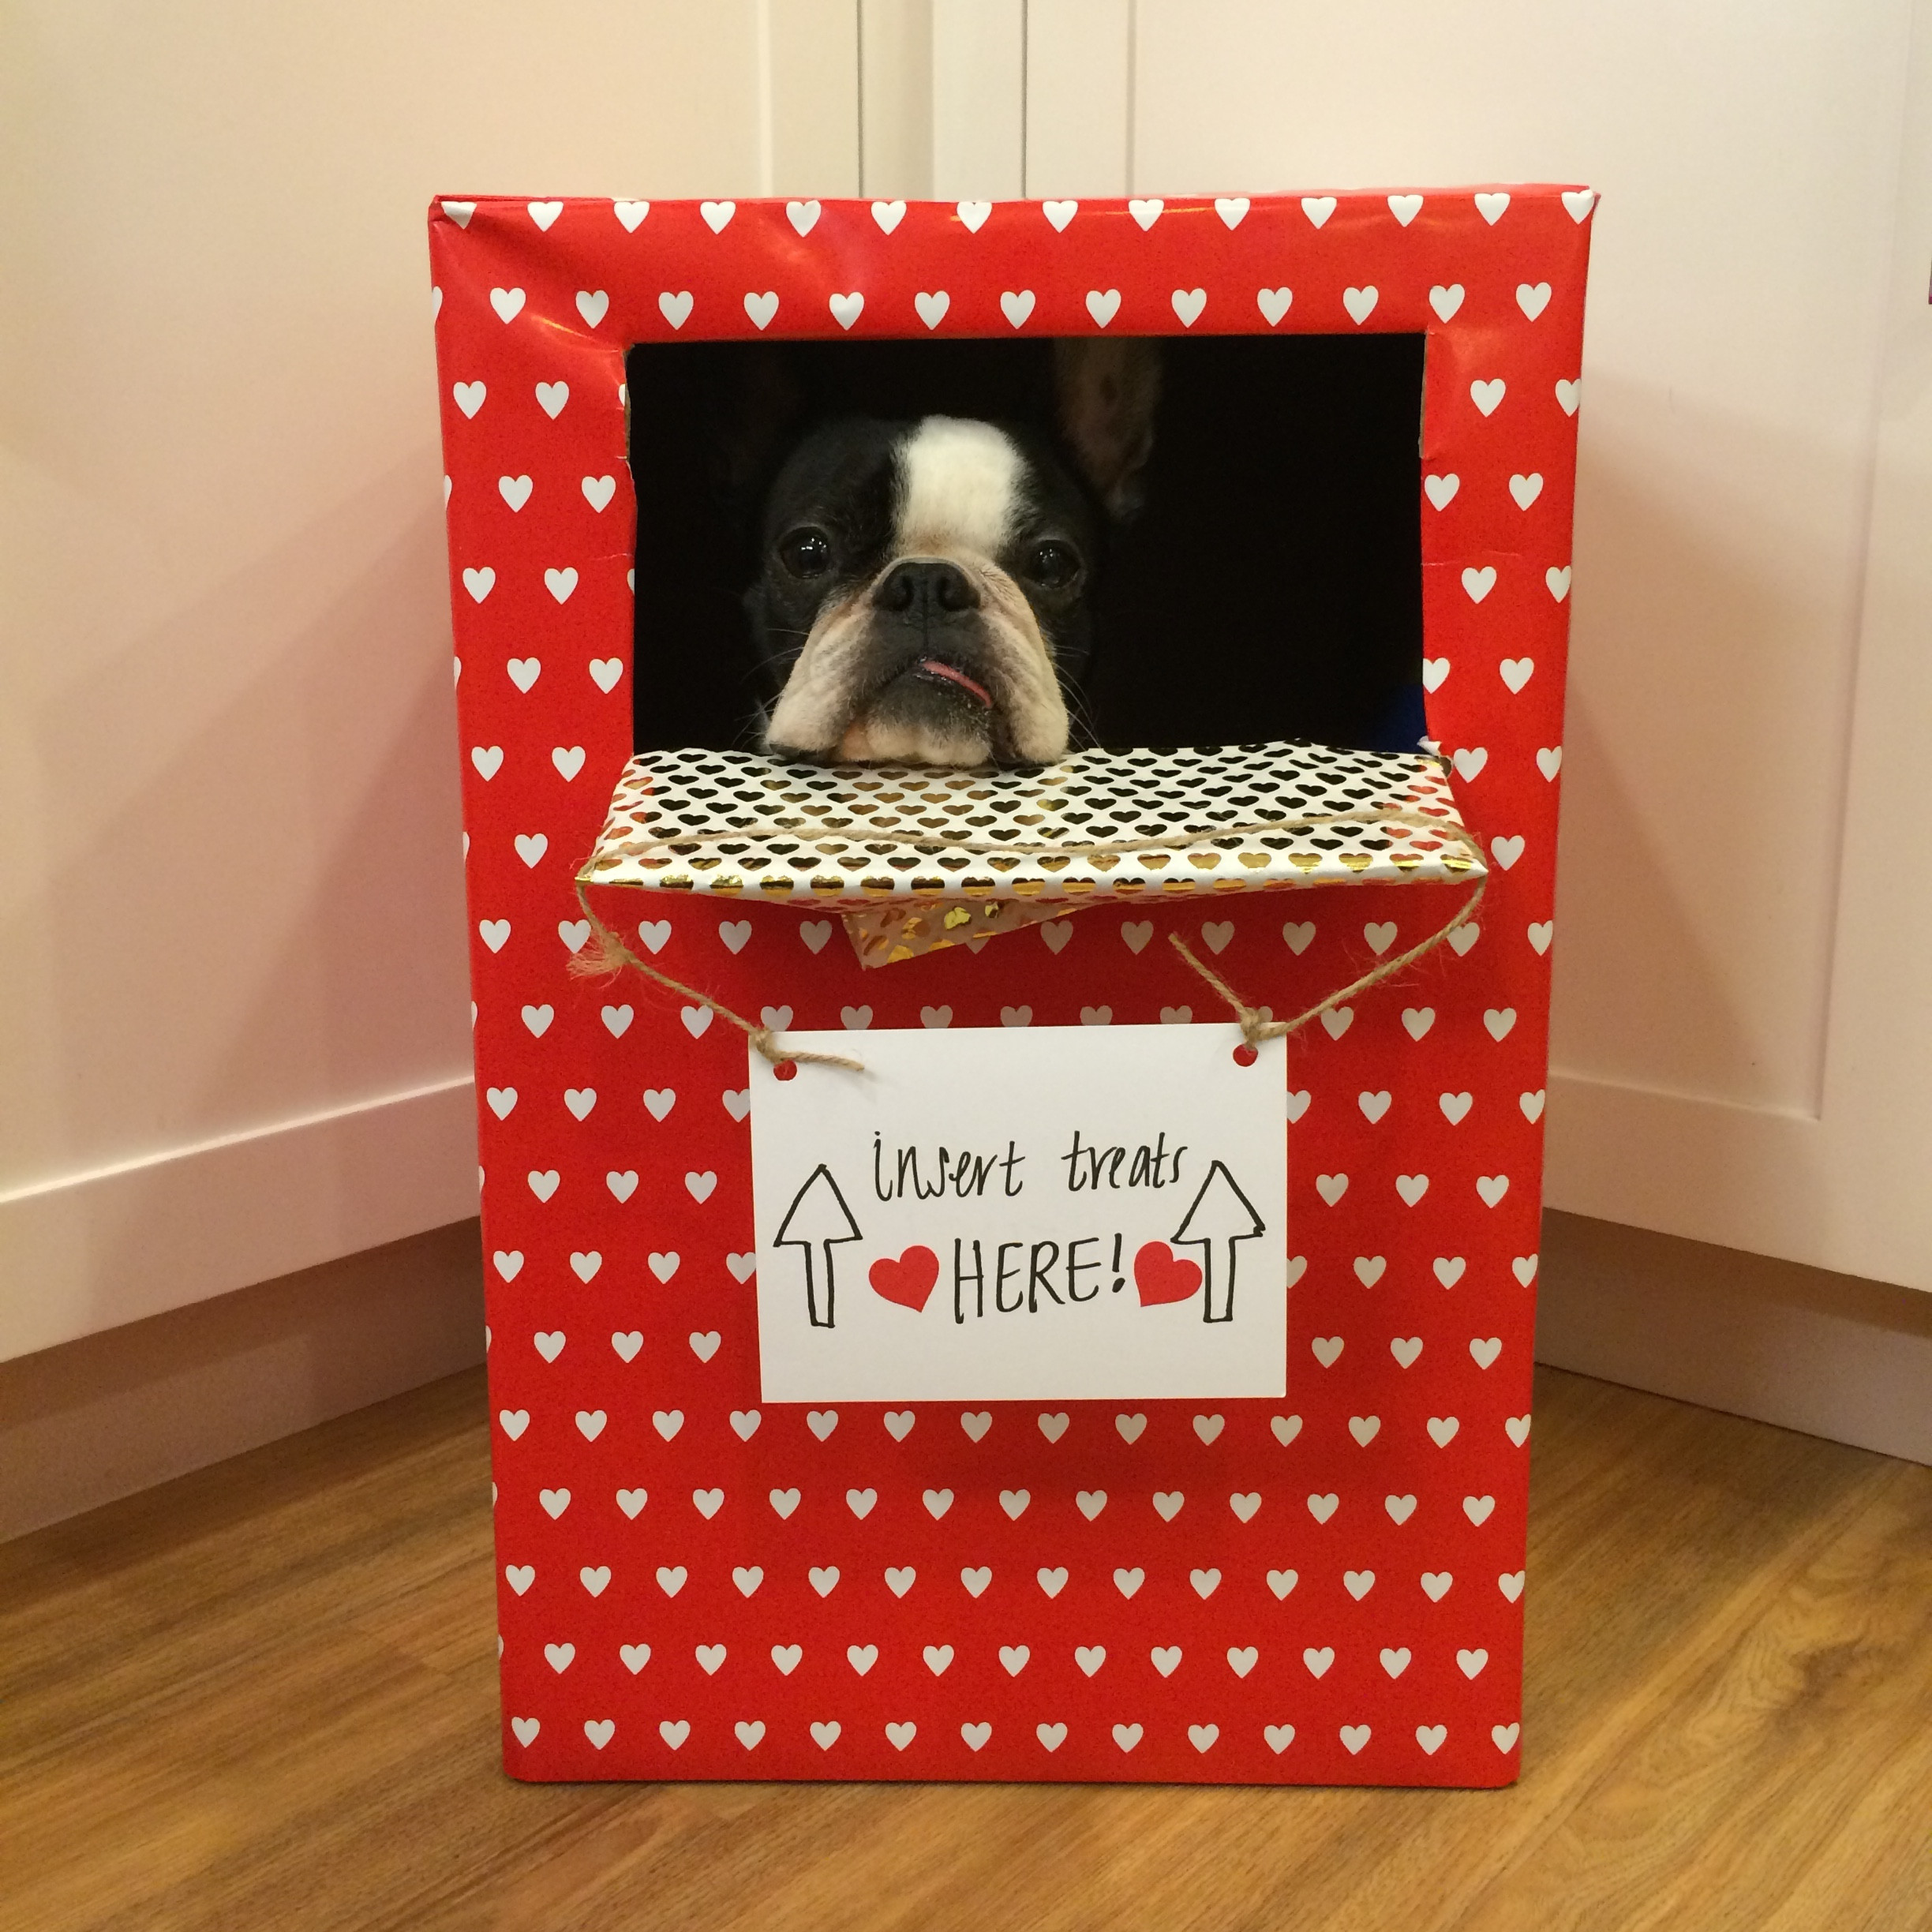 DIY Valentine Boxes
 We Tried 9 DIY Valentine s Crafts with Our Dogs—Here s